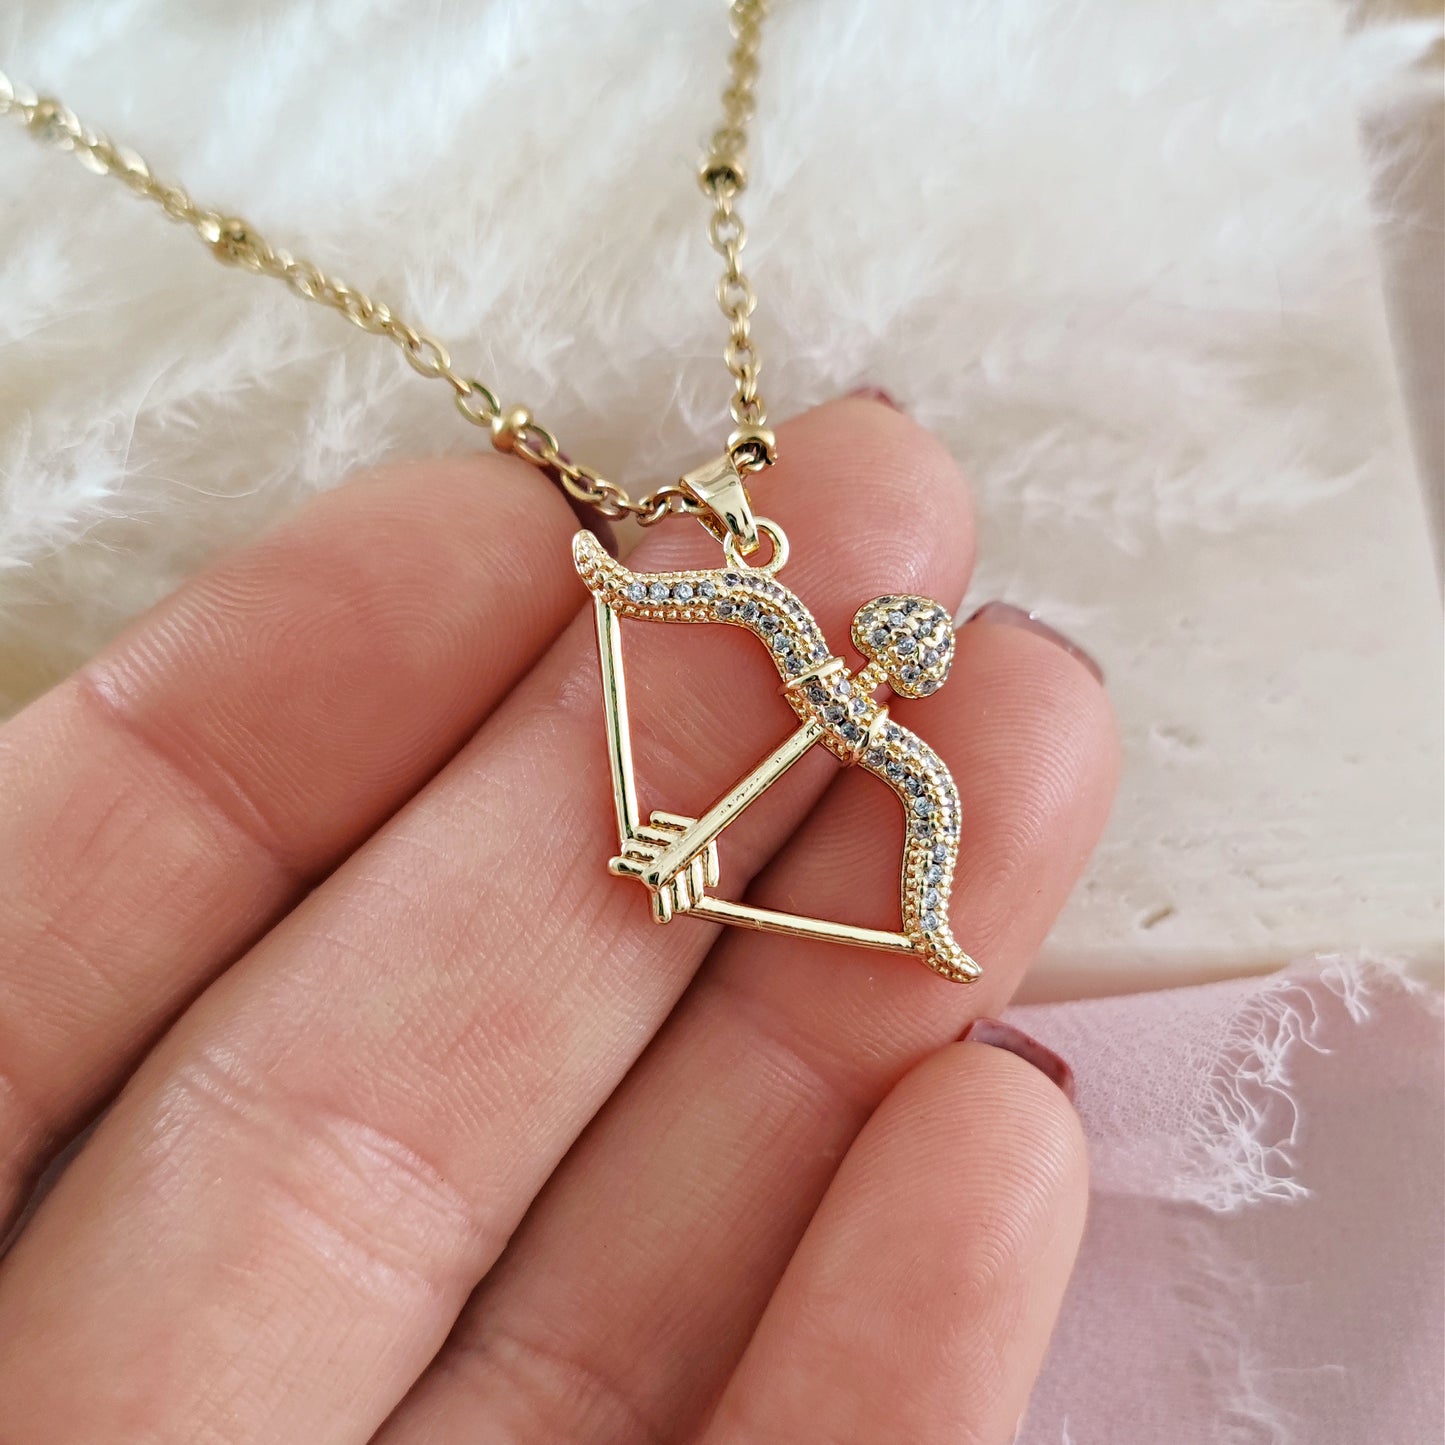 The Archer Necklace, Bow and Arrow Necklace, Archery Necklace, Bow Arrow Cupid Lover Necklace